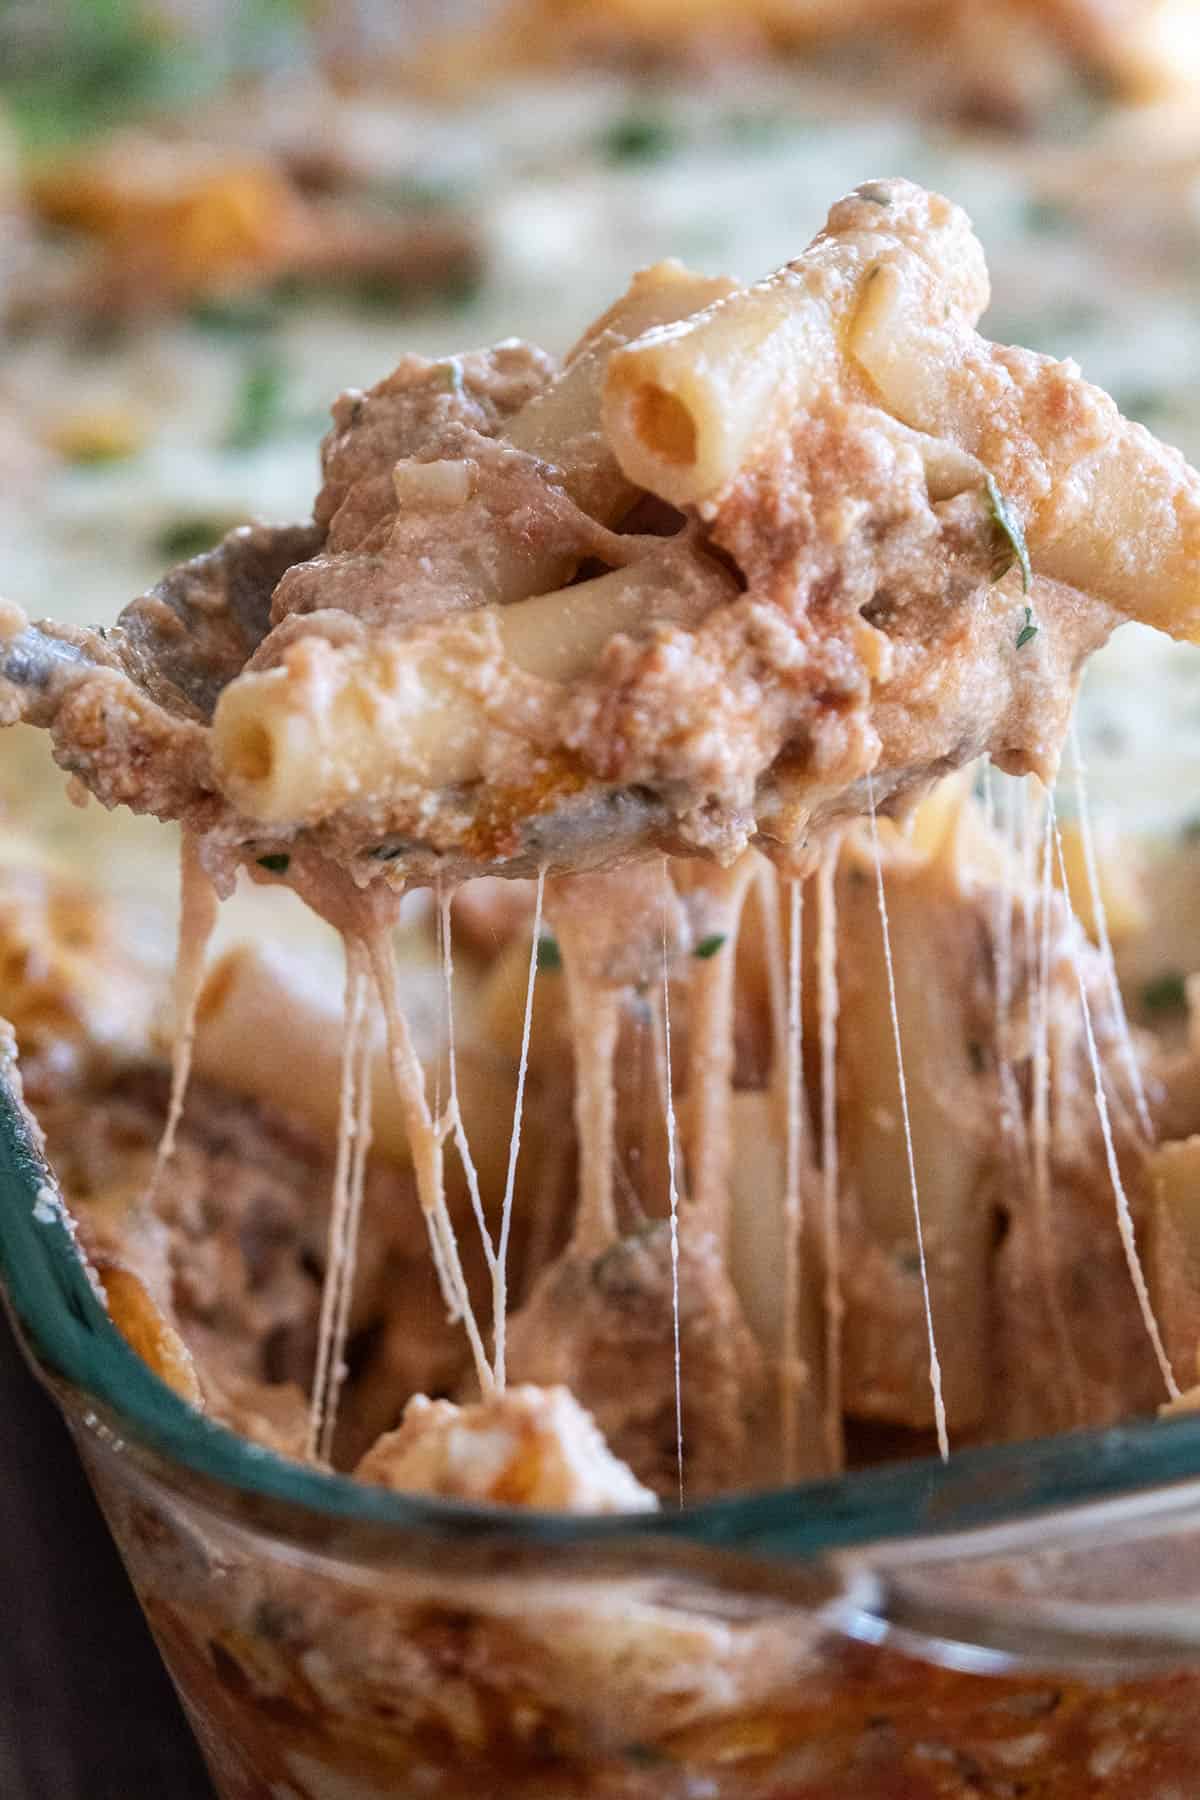 Cheesy pull of baked ziti on a spoon being scooped from the baking dish